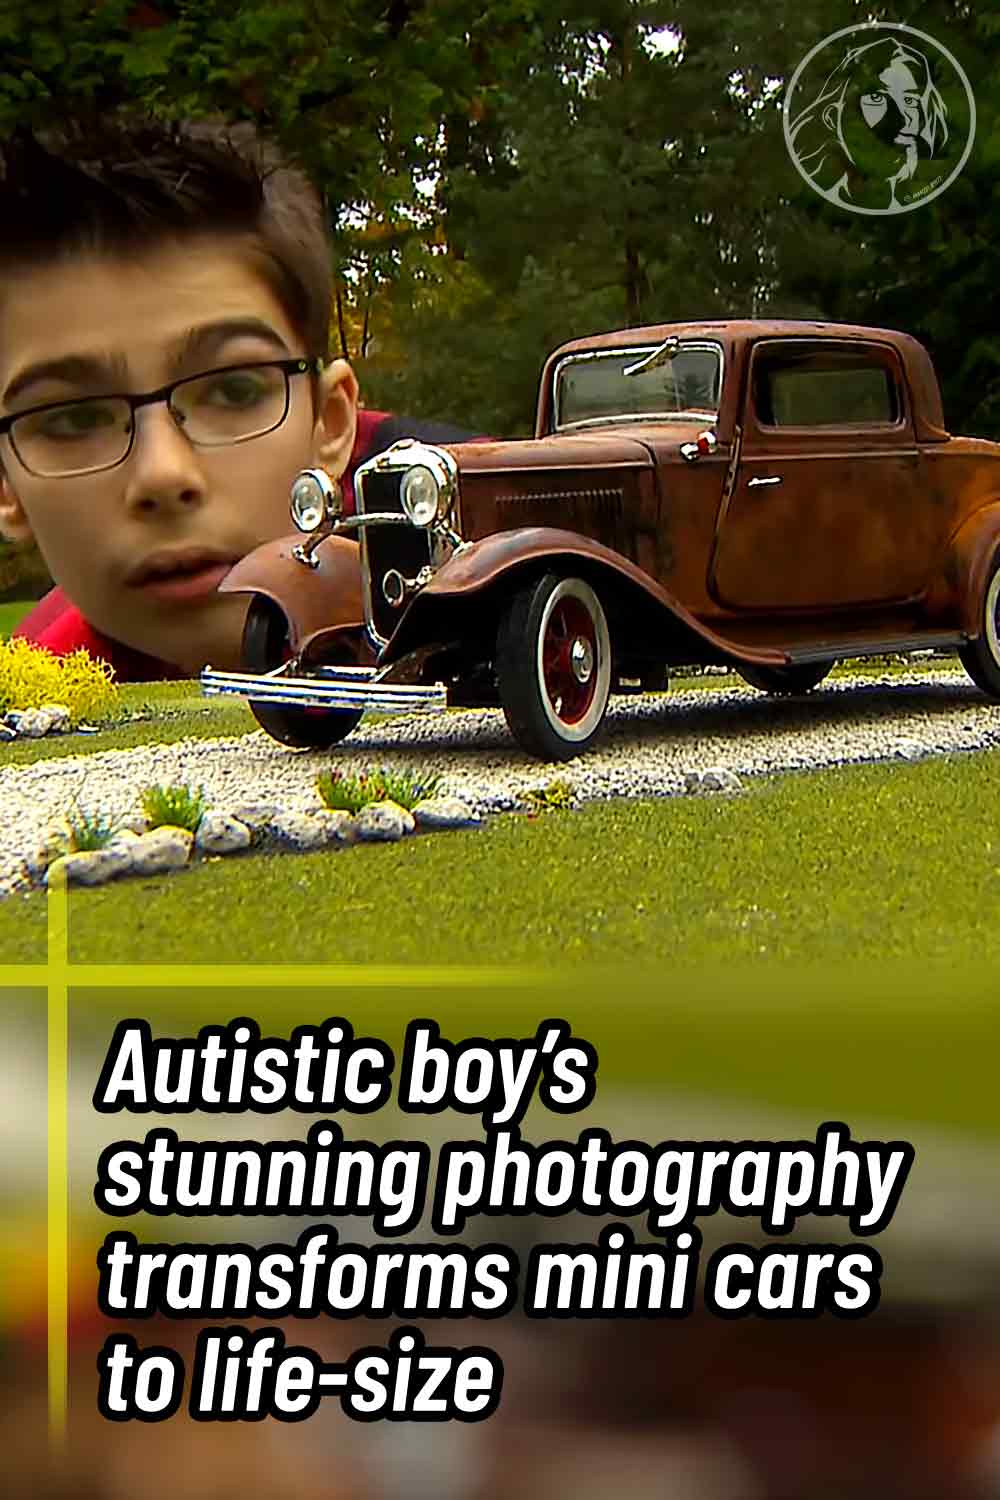 Autistic boy’s stunning photography transforms mini cars to life-size